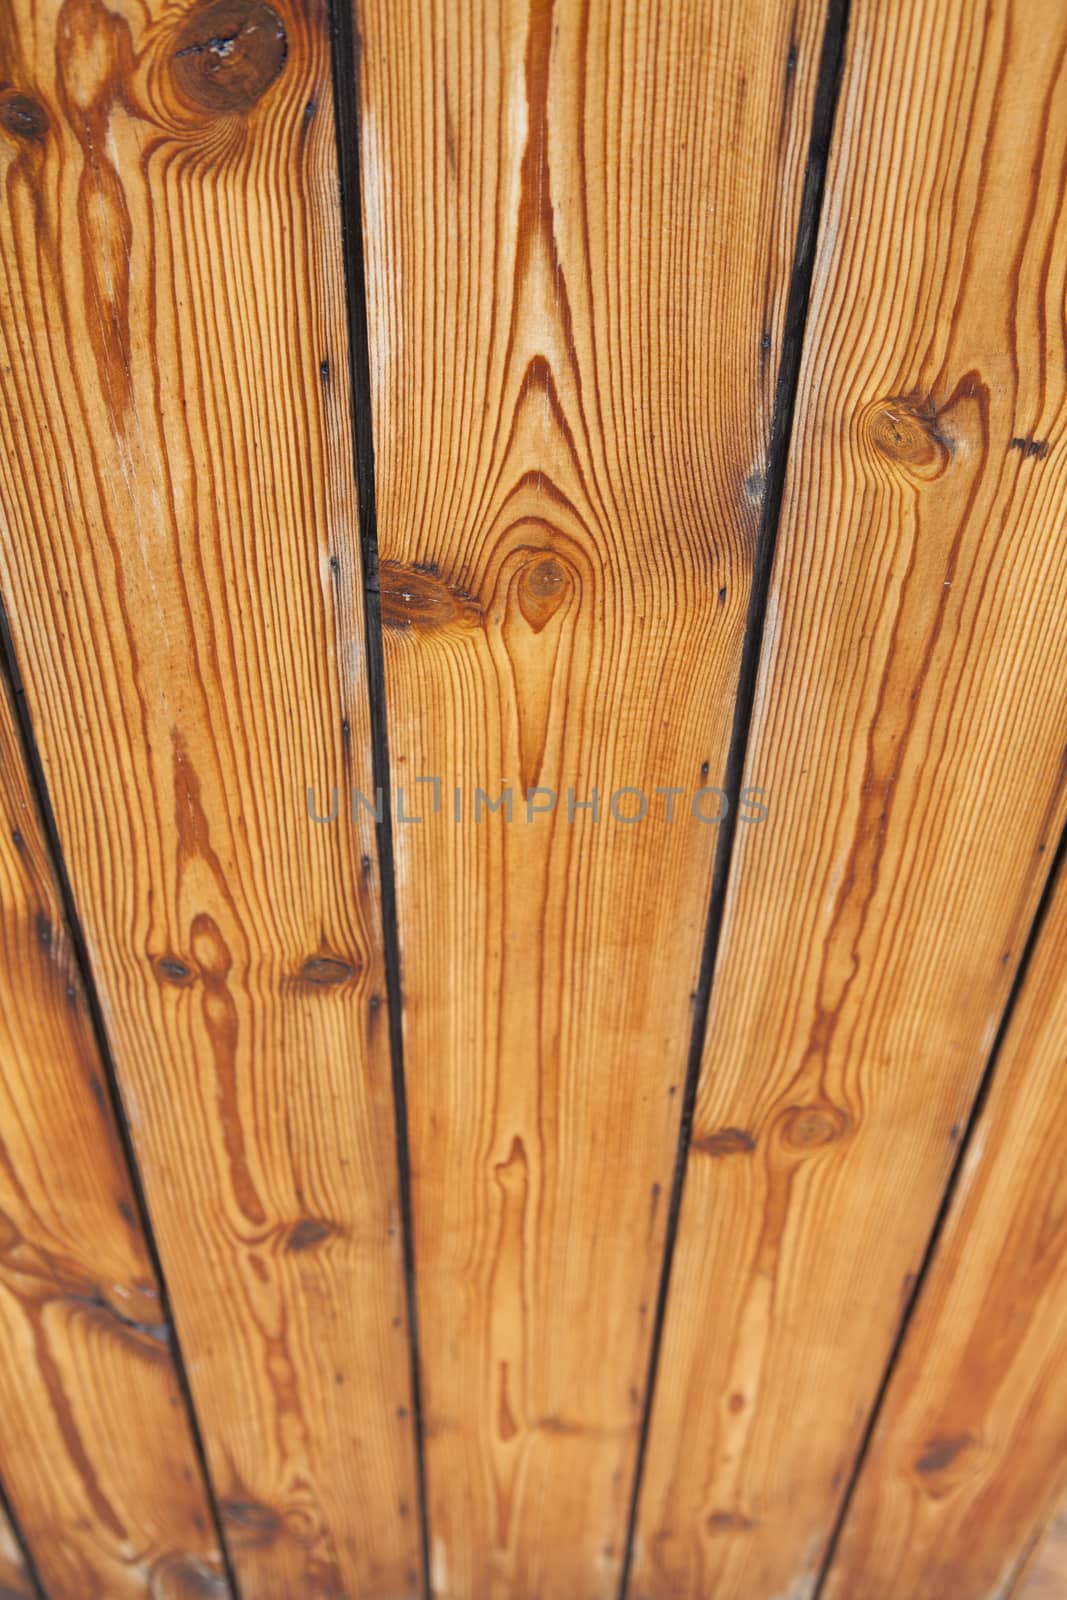 High resolution grunge wood background by jee1999